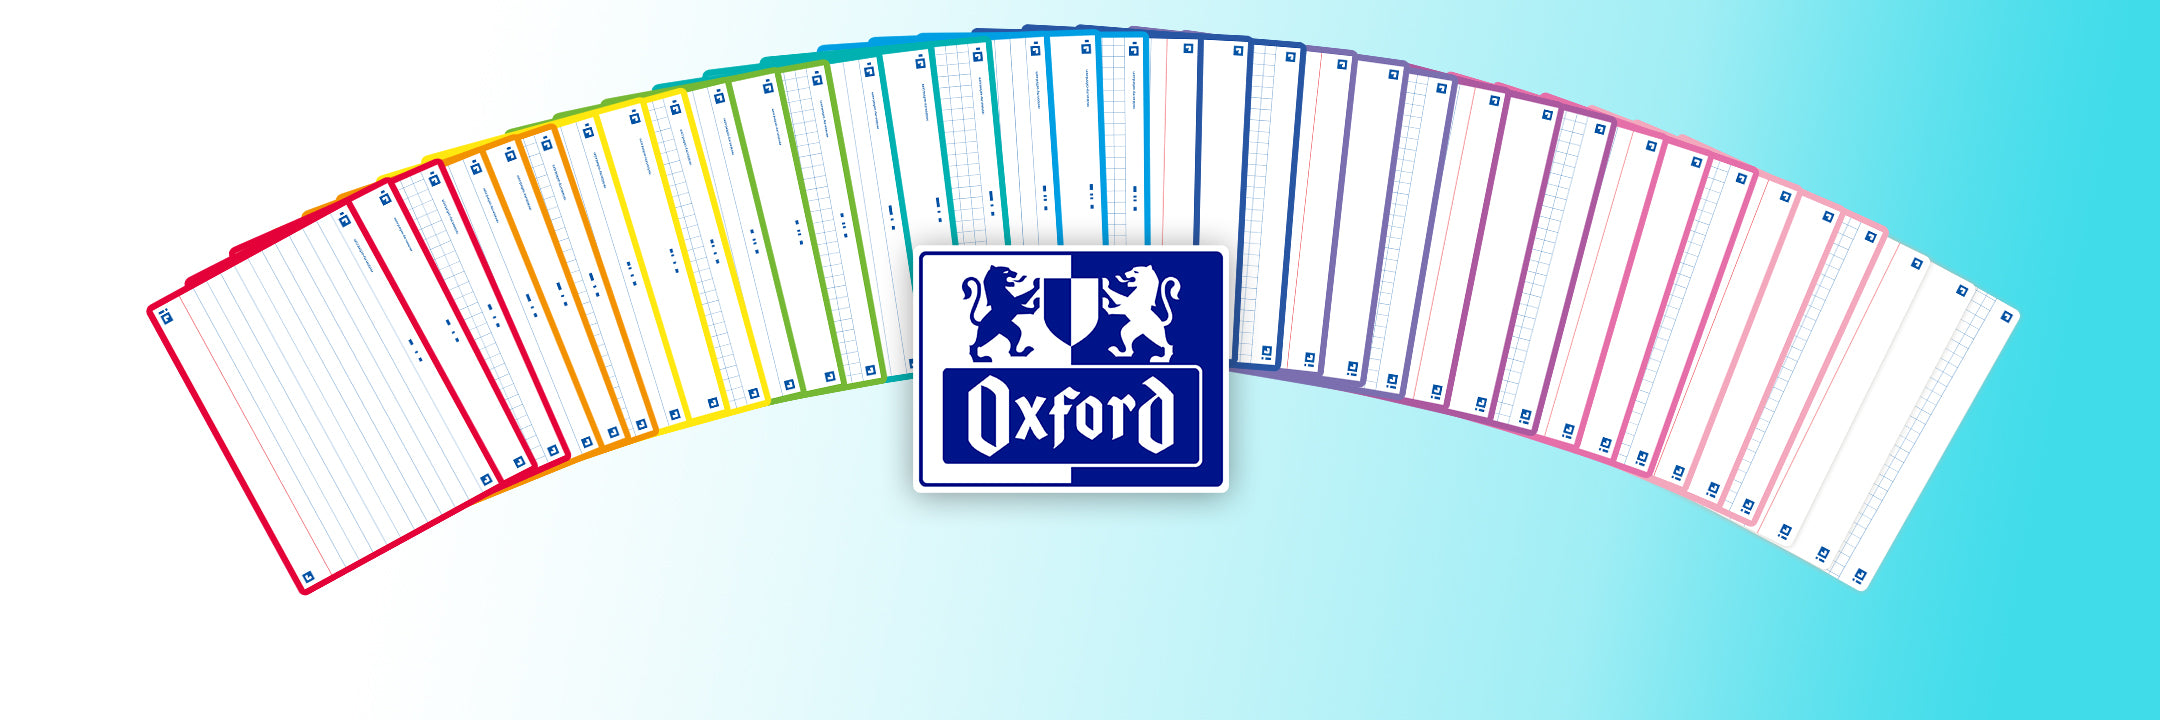 Oxford Flash 2.0 A6 Flash Cards (Pack of 80) a6 Violet 